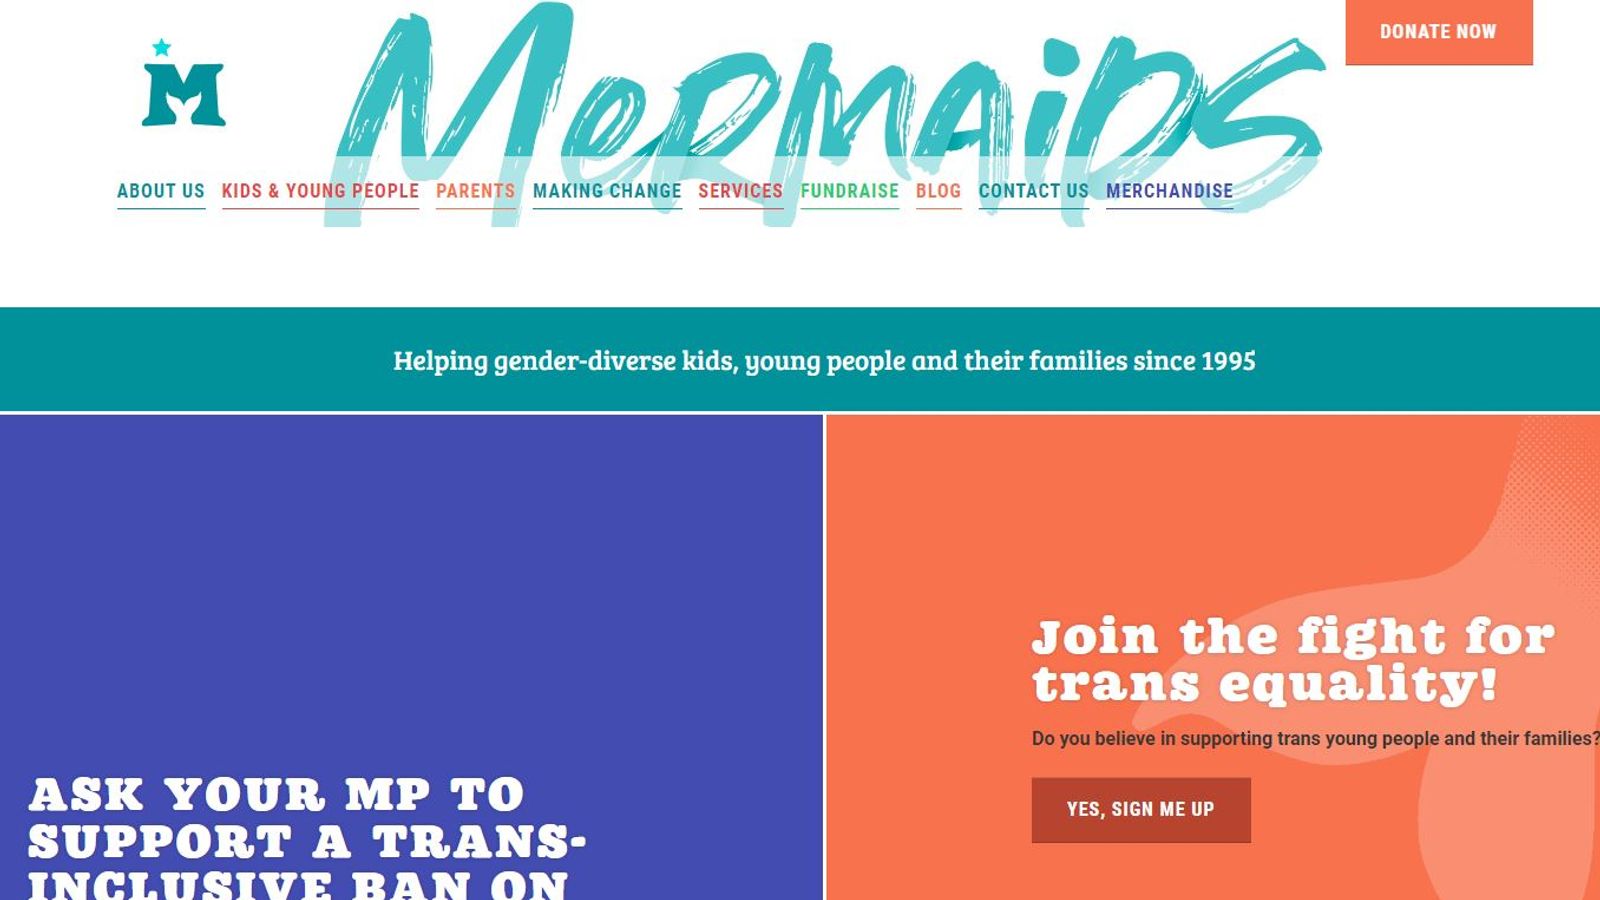 Trans charity Mermaids investigated after 'offering chest binders without parental consent'